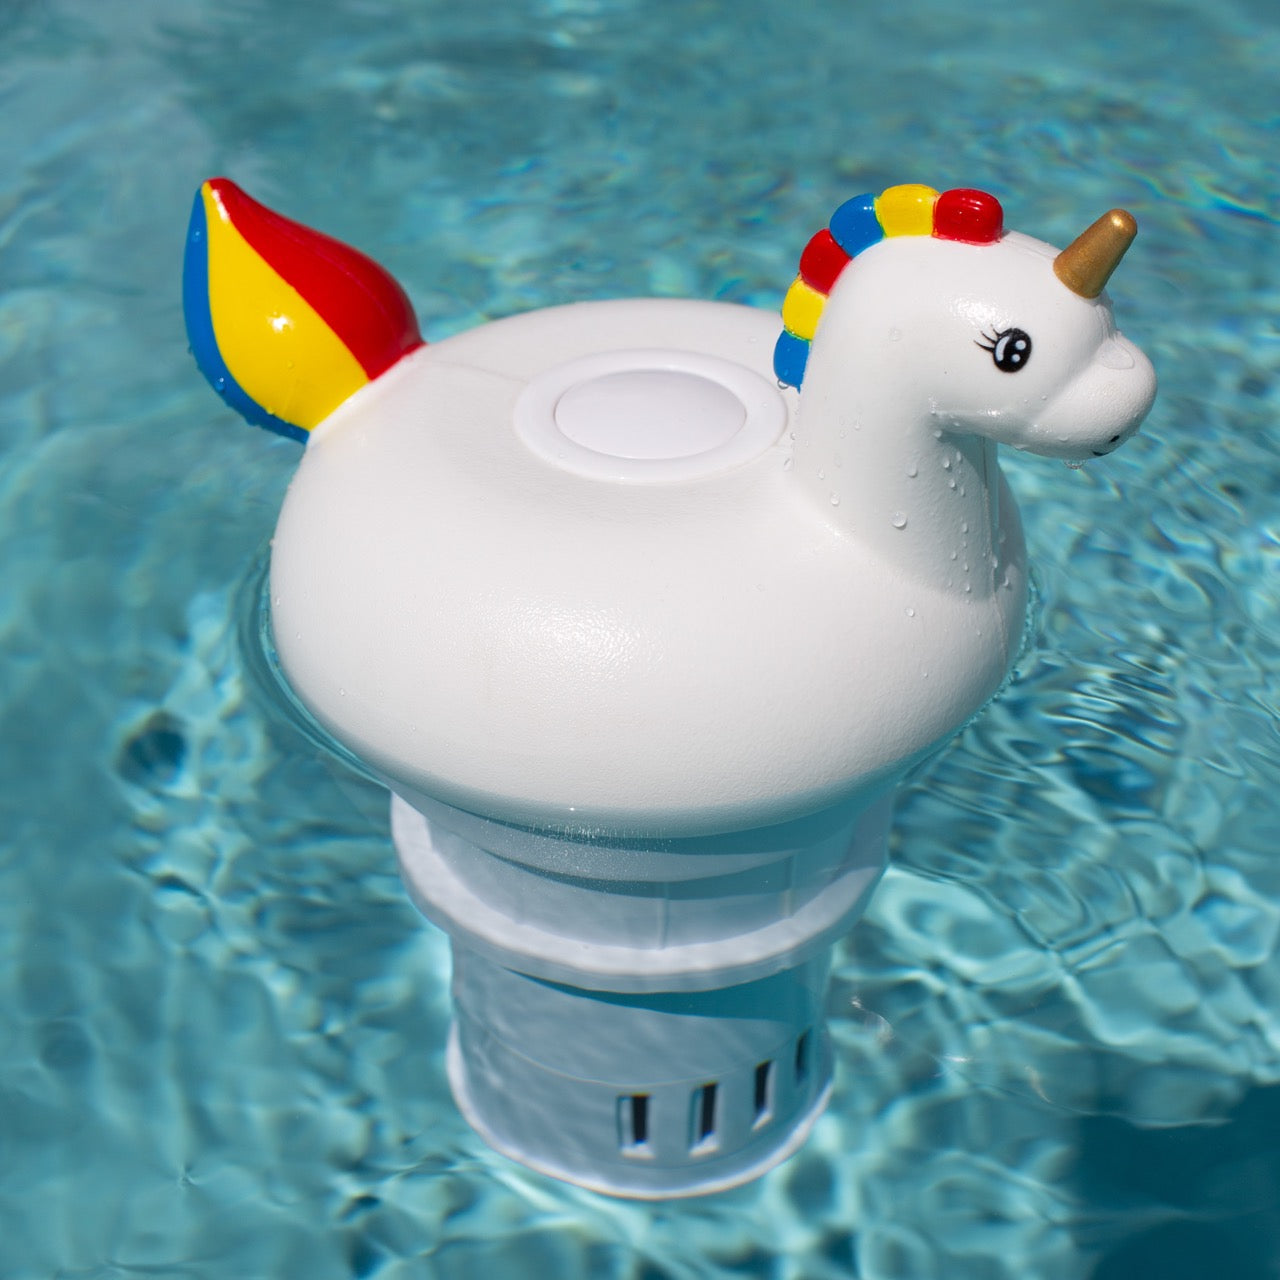 Blue Mano Unicorn Floating Chlorine Dispenser for 3 inch & 1 inch Chlorine Tablets with Refill Warning, Durable Design, Unicorn Floater & Dispenser for Inground and Above Ground Swimming Pool